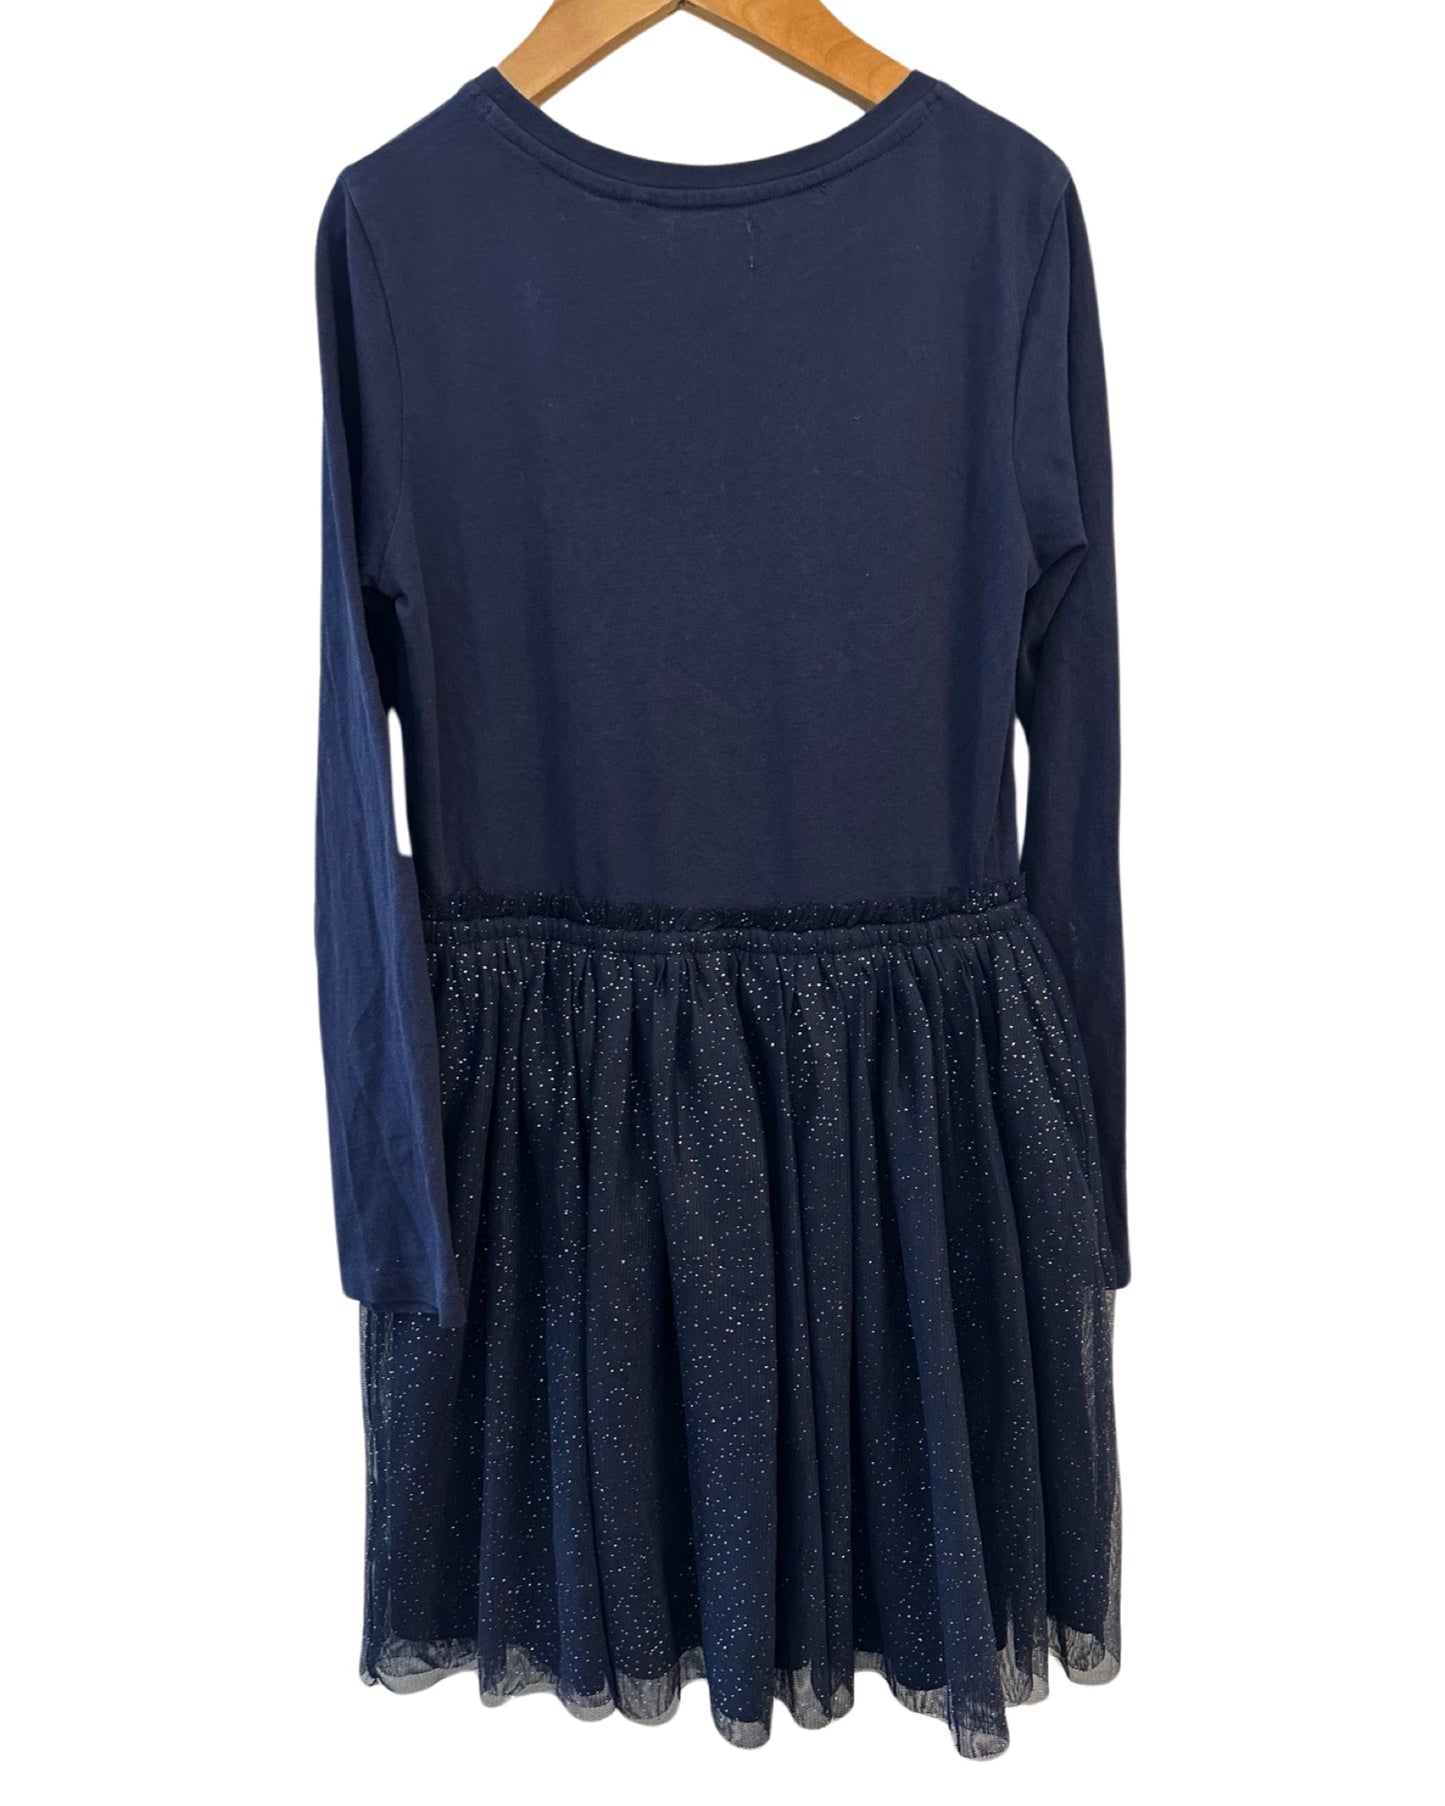 Next navy star dress with tulle skirt (6-7yrs)